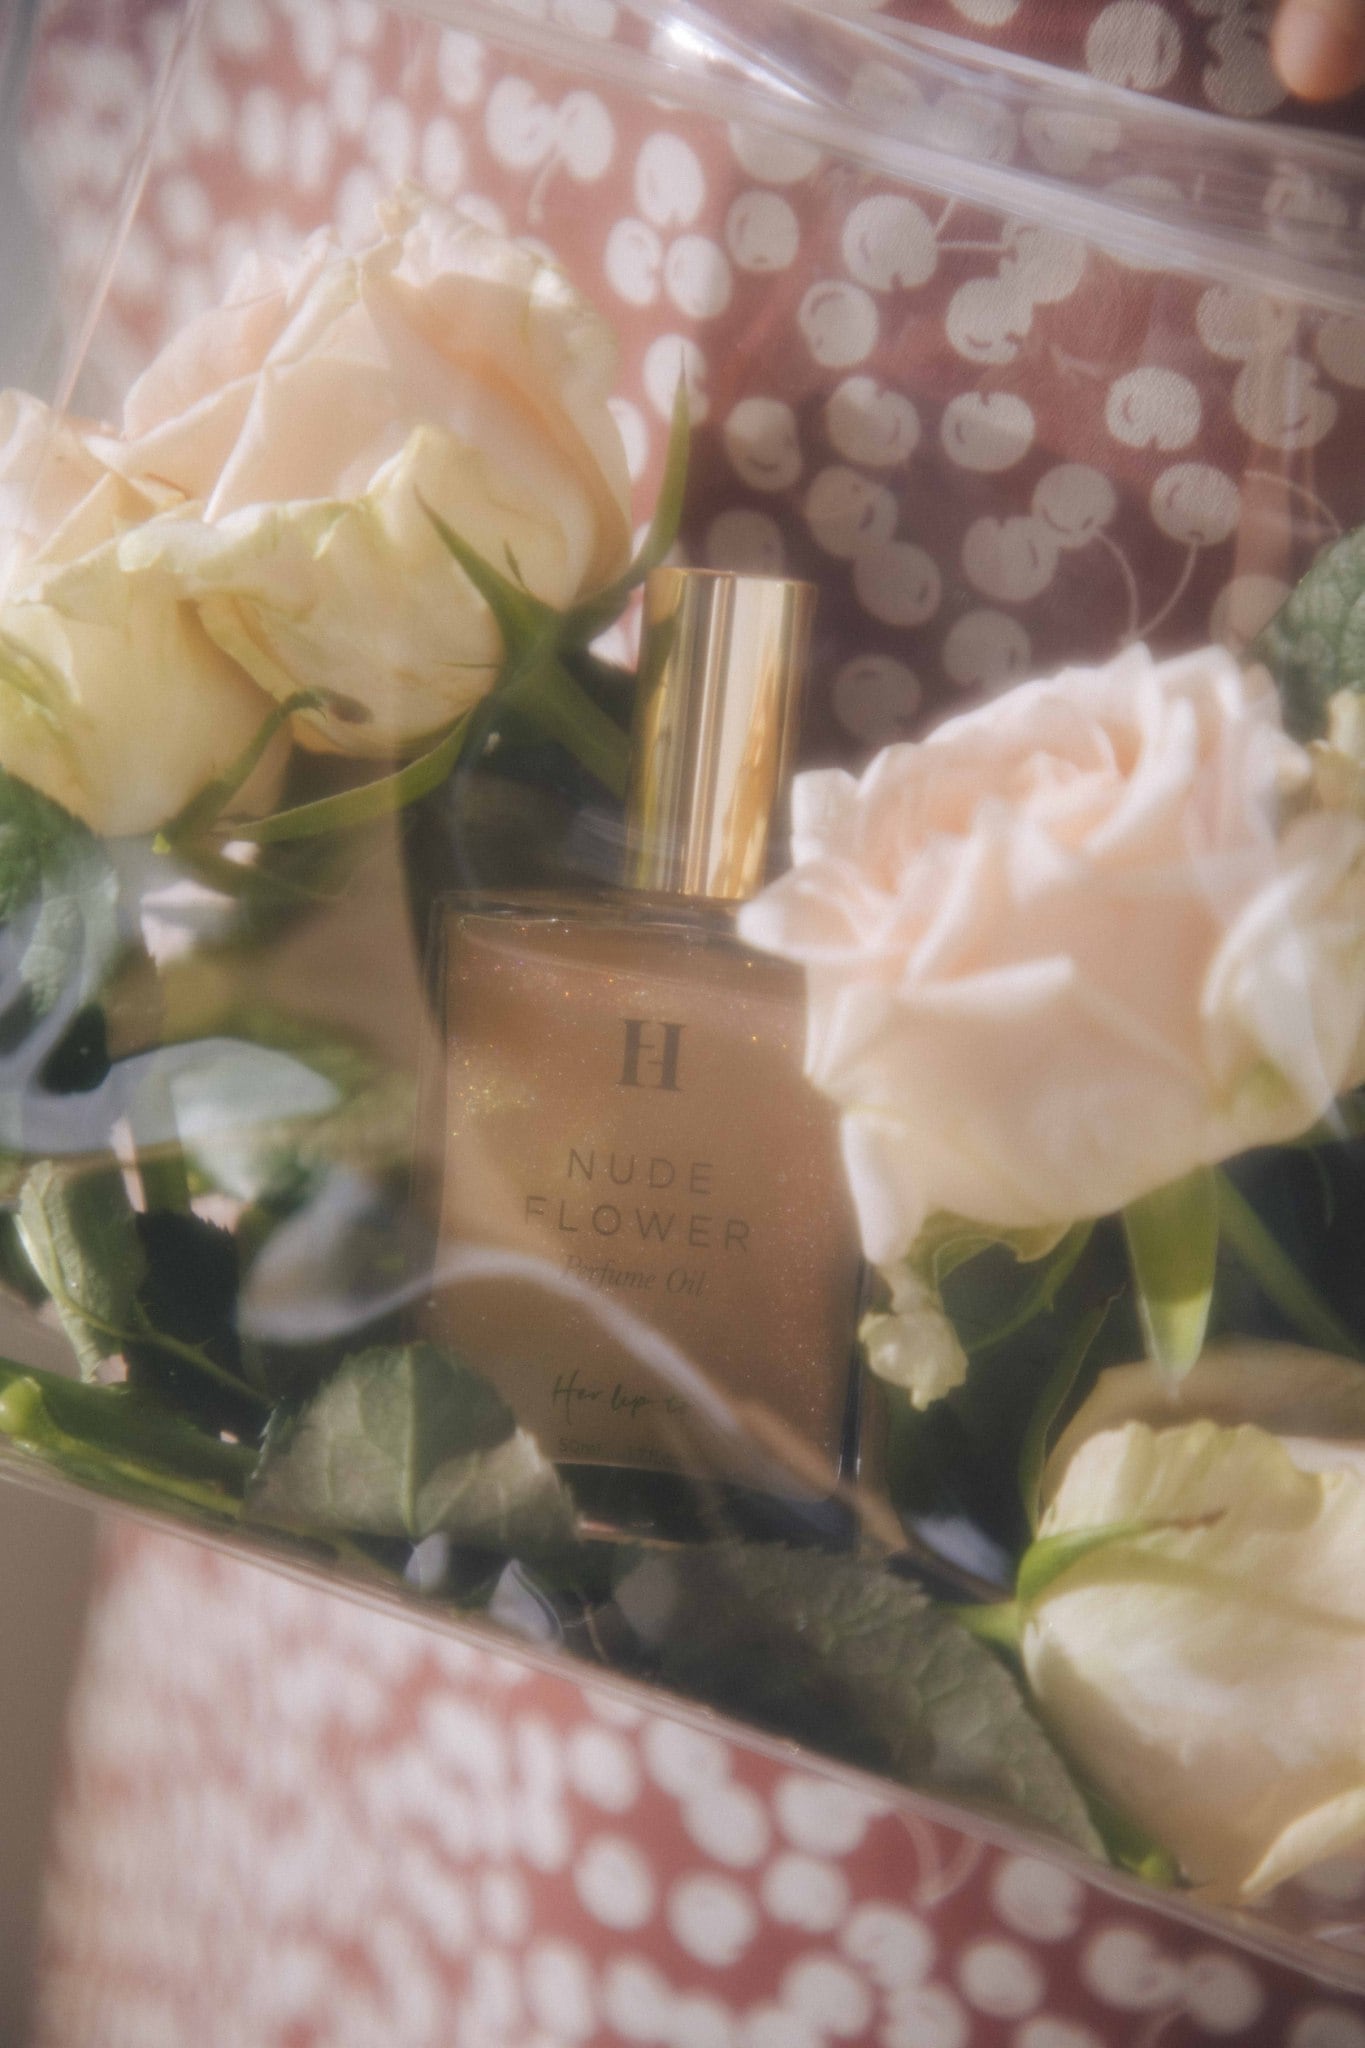 her lip to  NUDE FLOWER perfume oil